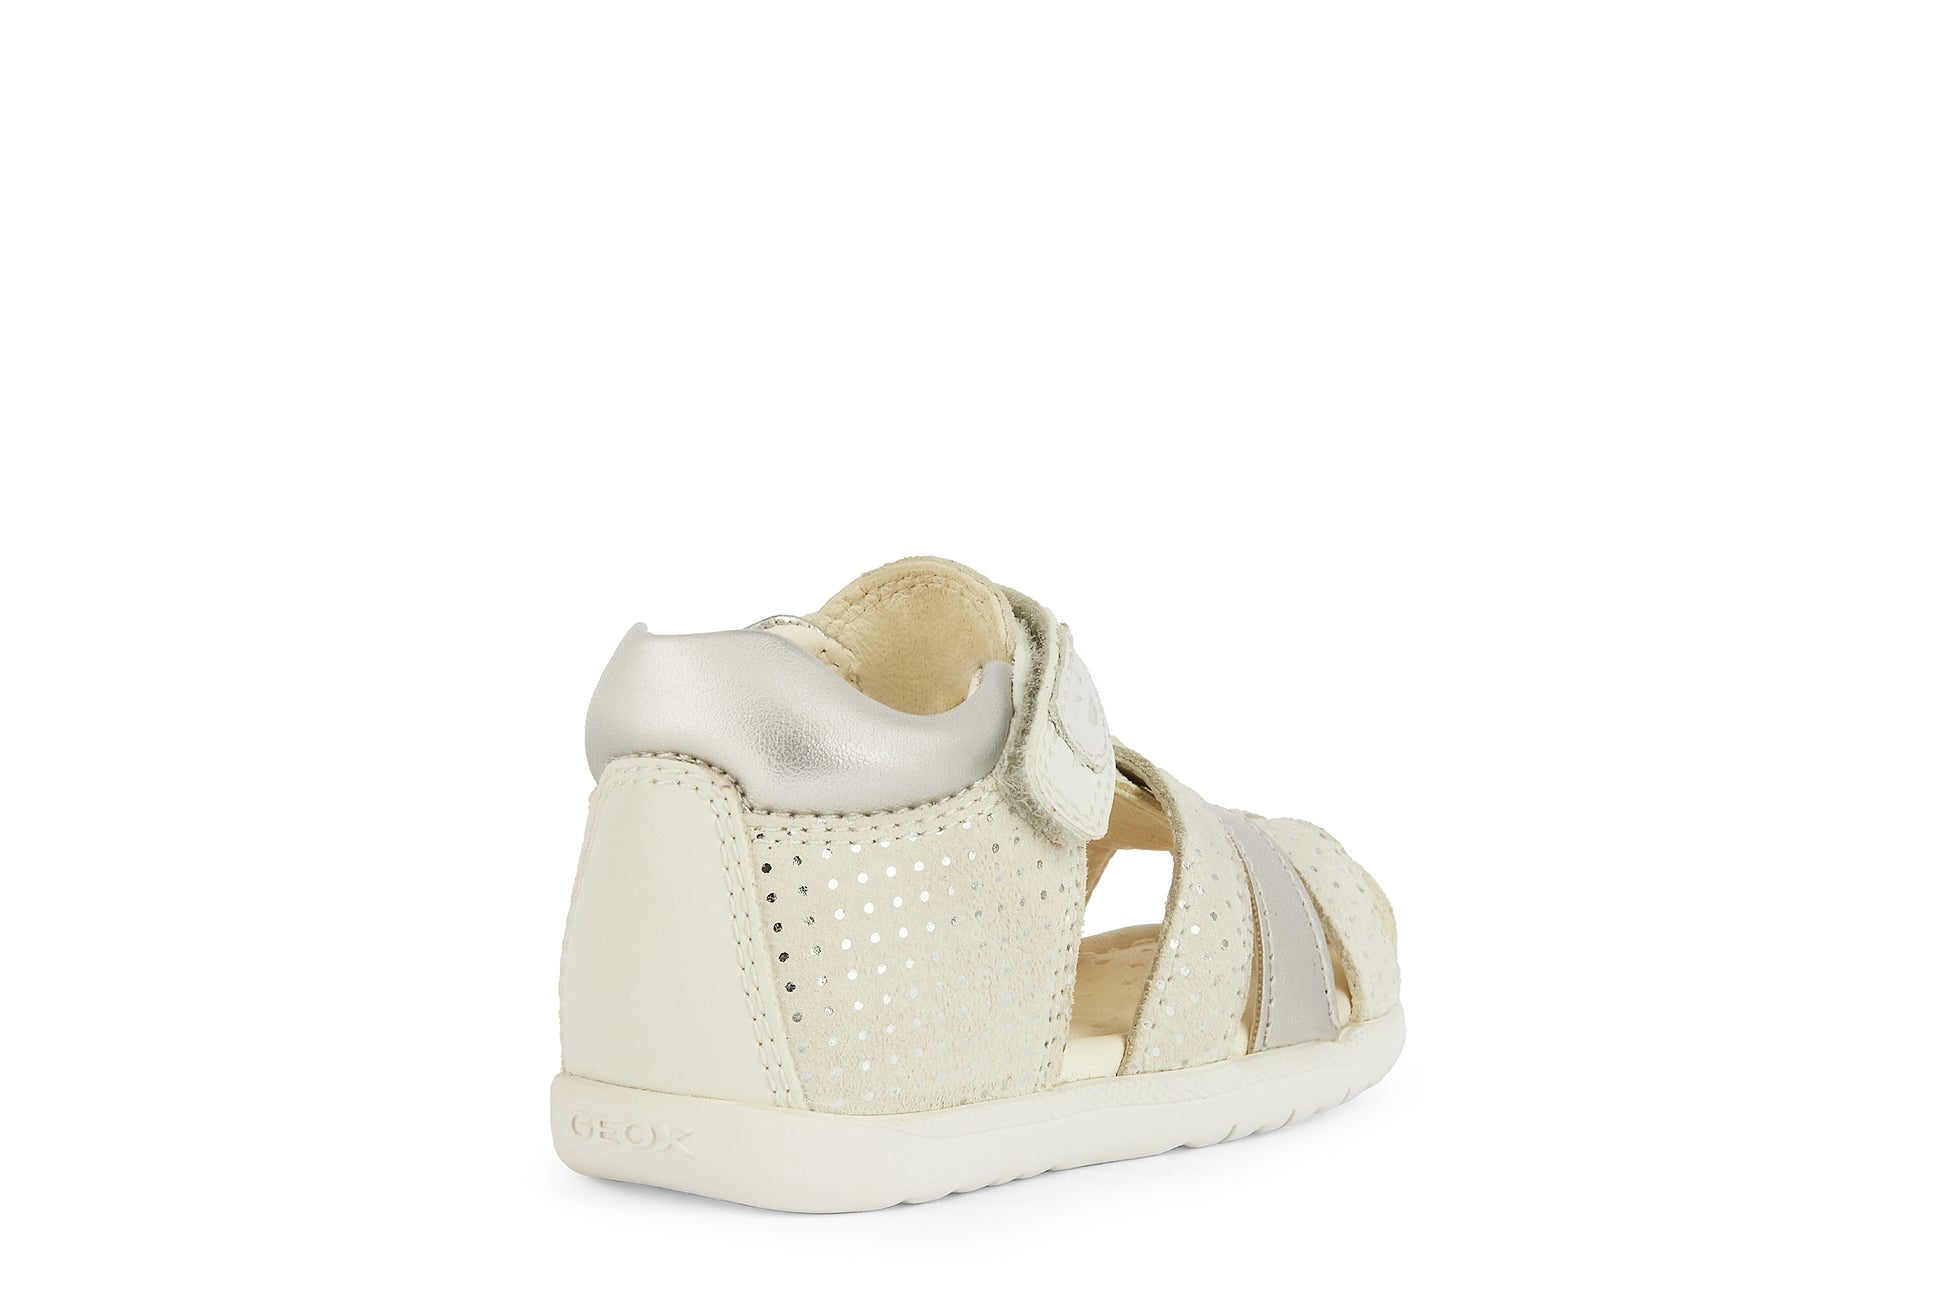 A girls closed toe sandal by Geox, style B Macchia, in off white spot print and silver nubuck leather with velcro fastening. Angled right side view.